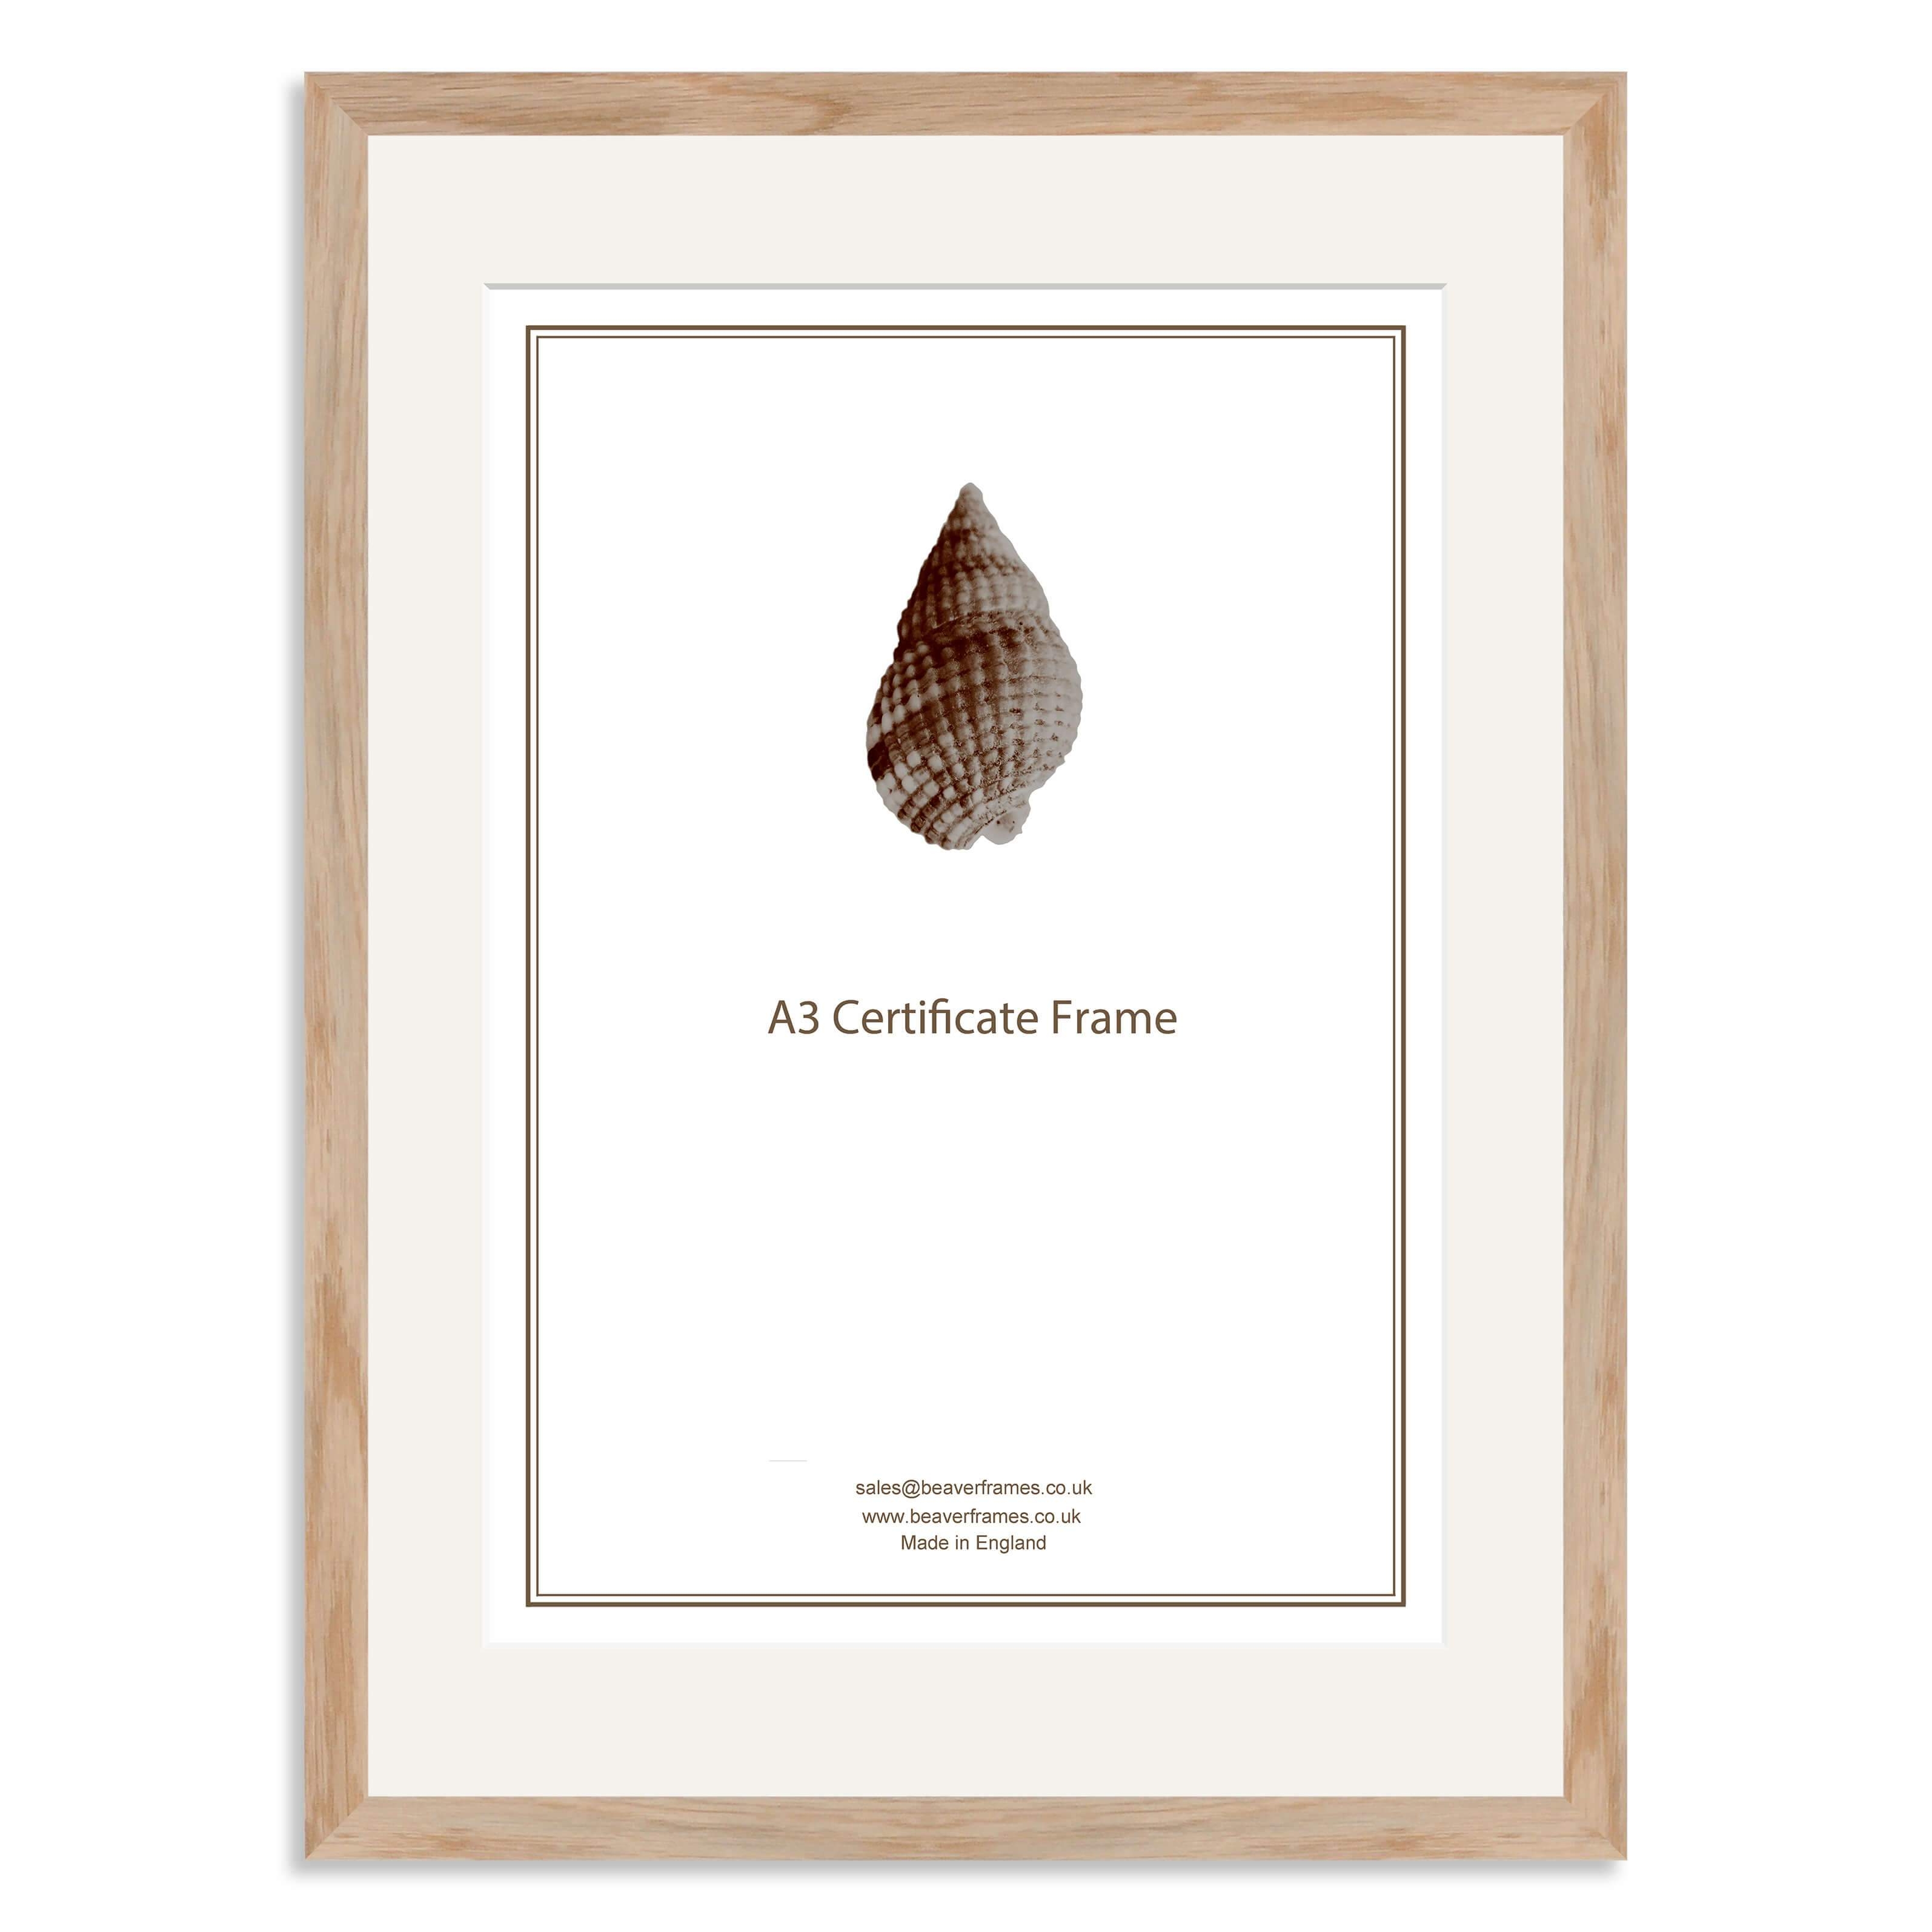 Elite Collection: Solid Oak Frame and Mount for A3 Certificate